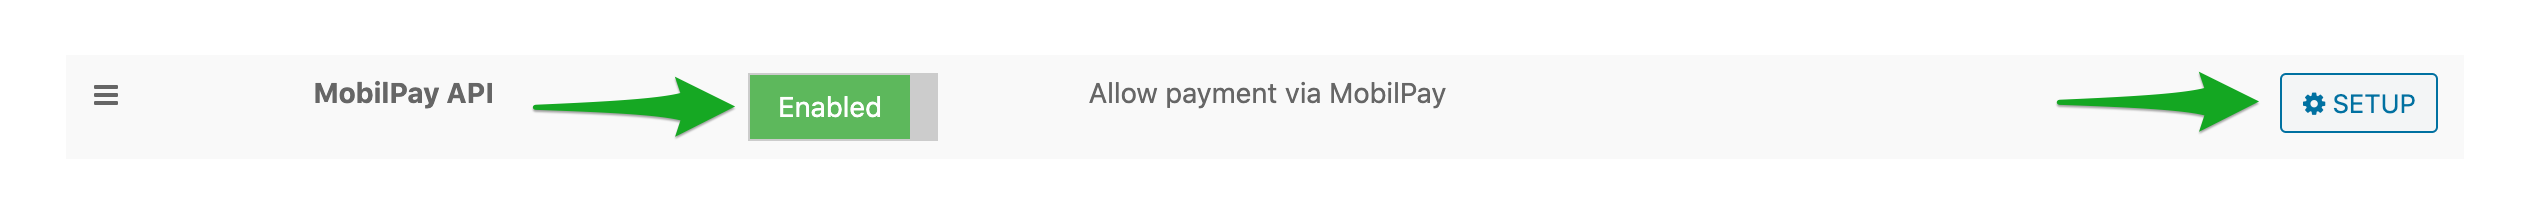 Set up mobilPay Payment in WPFreelance Theme - enable mobilPay